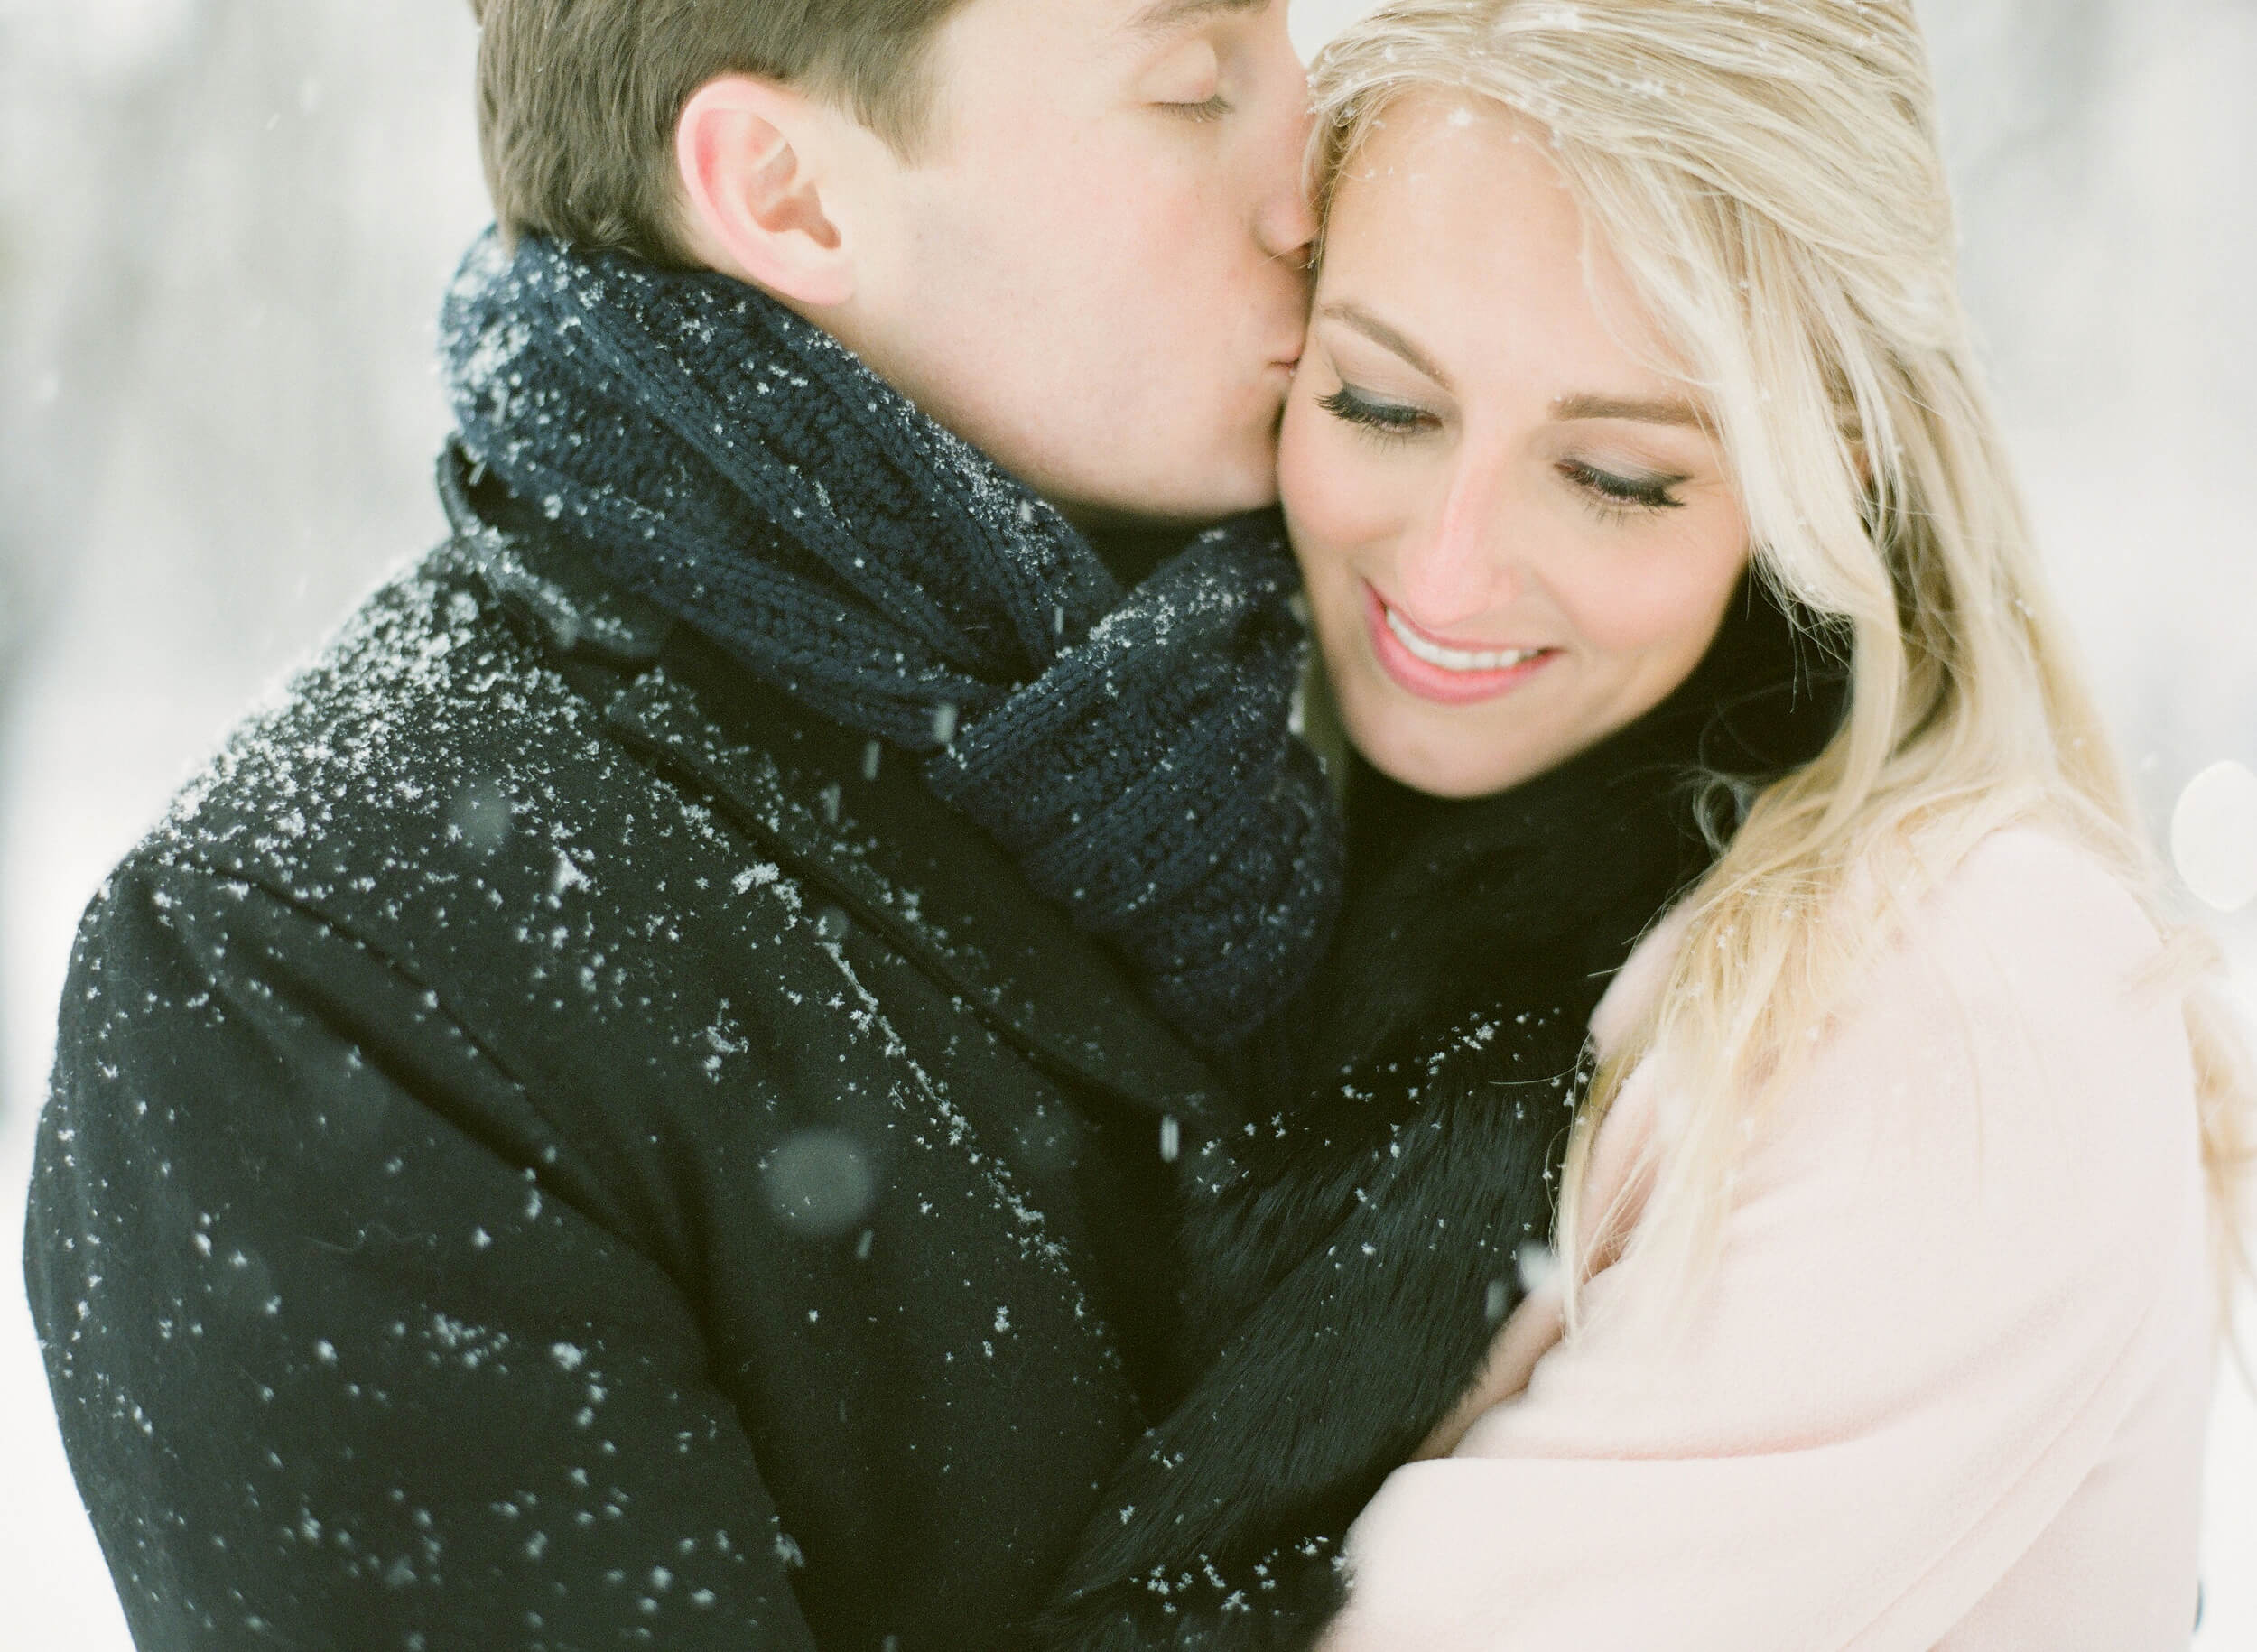 winter engagement shoot in Chicago